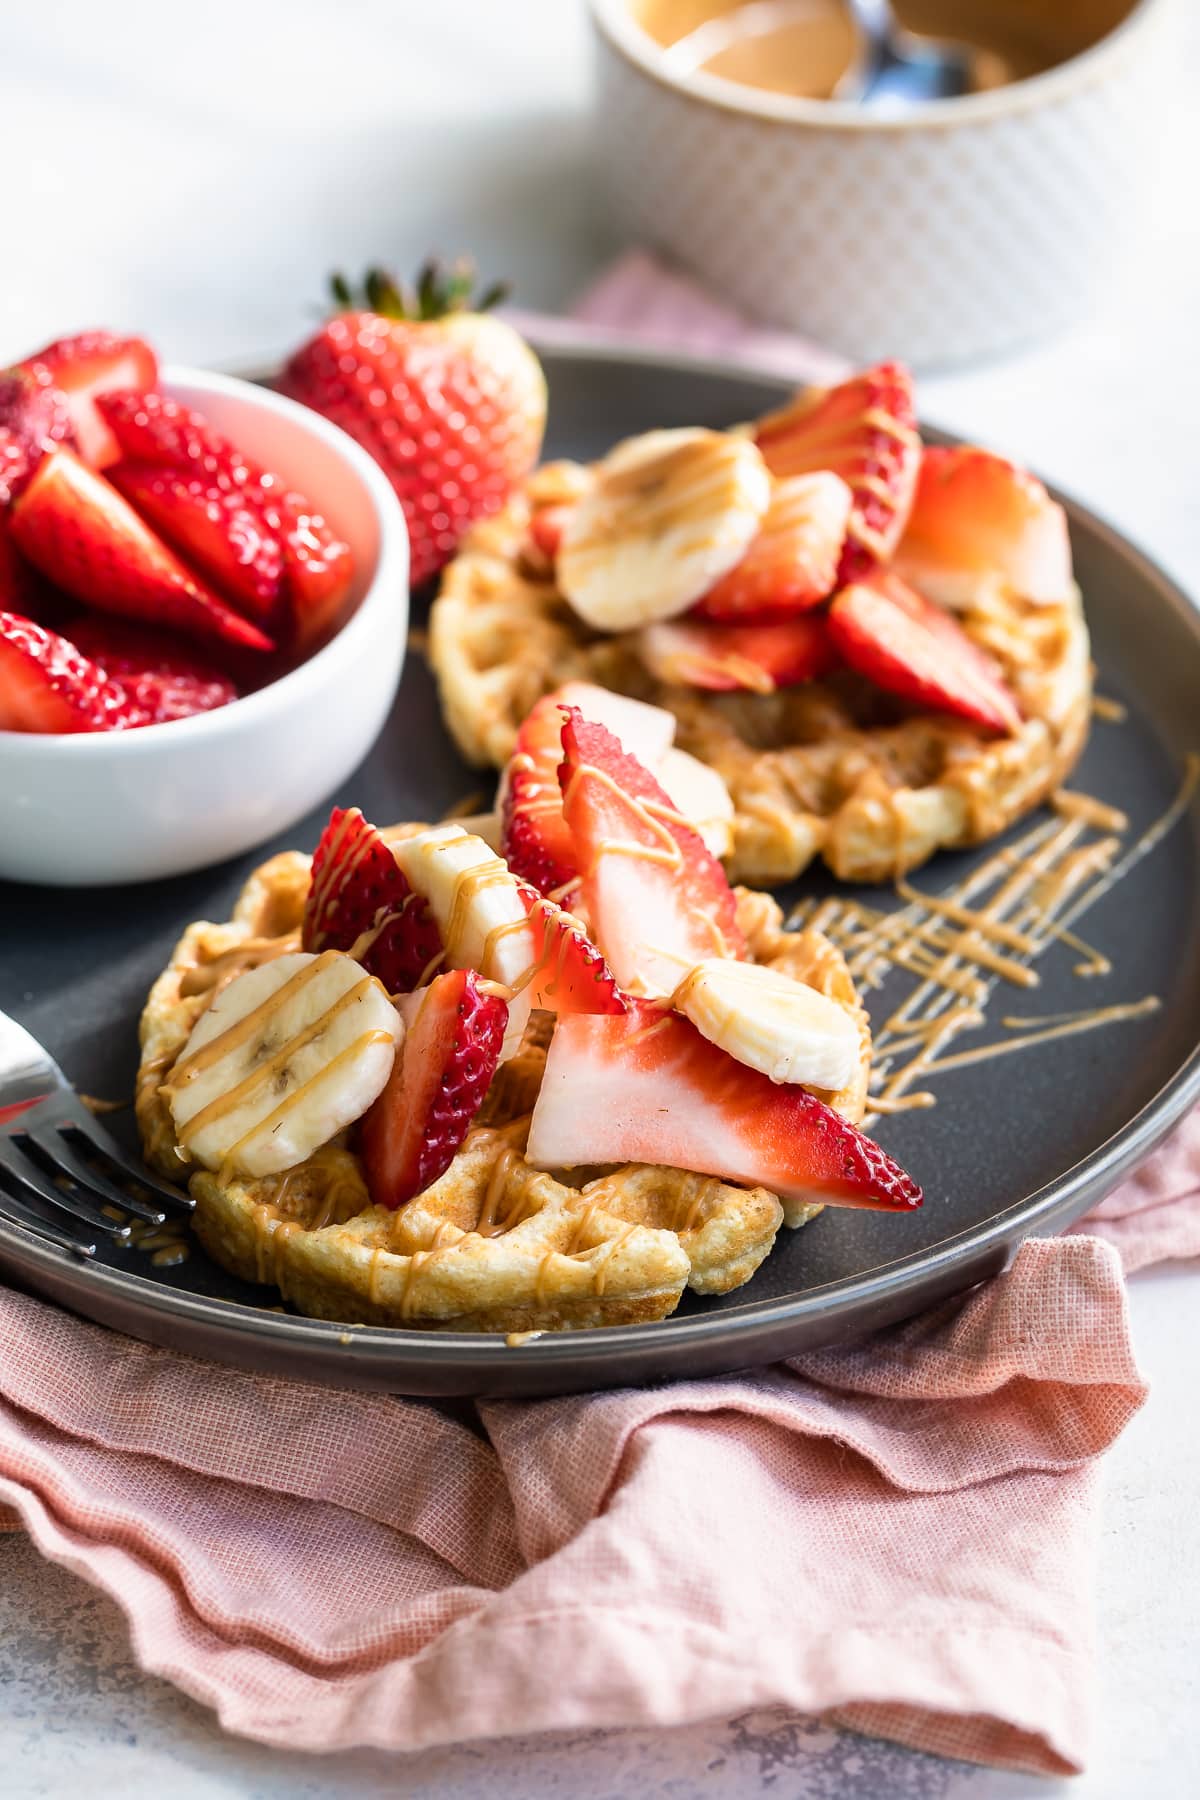 Waffles with strawberries, peanut ،er and bananas.